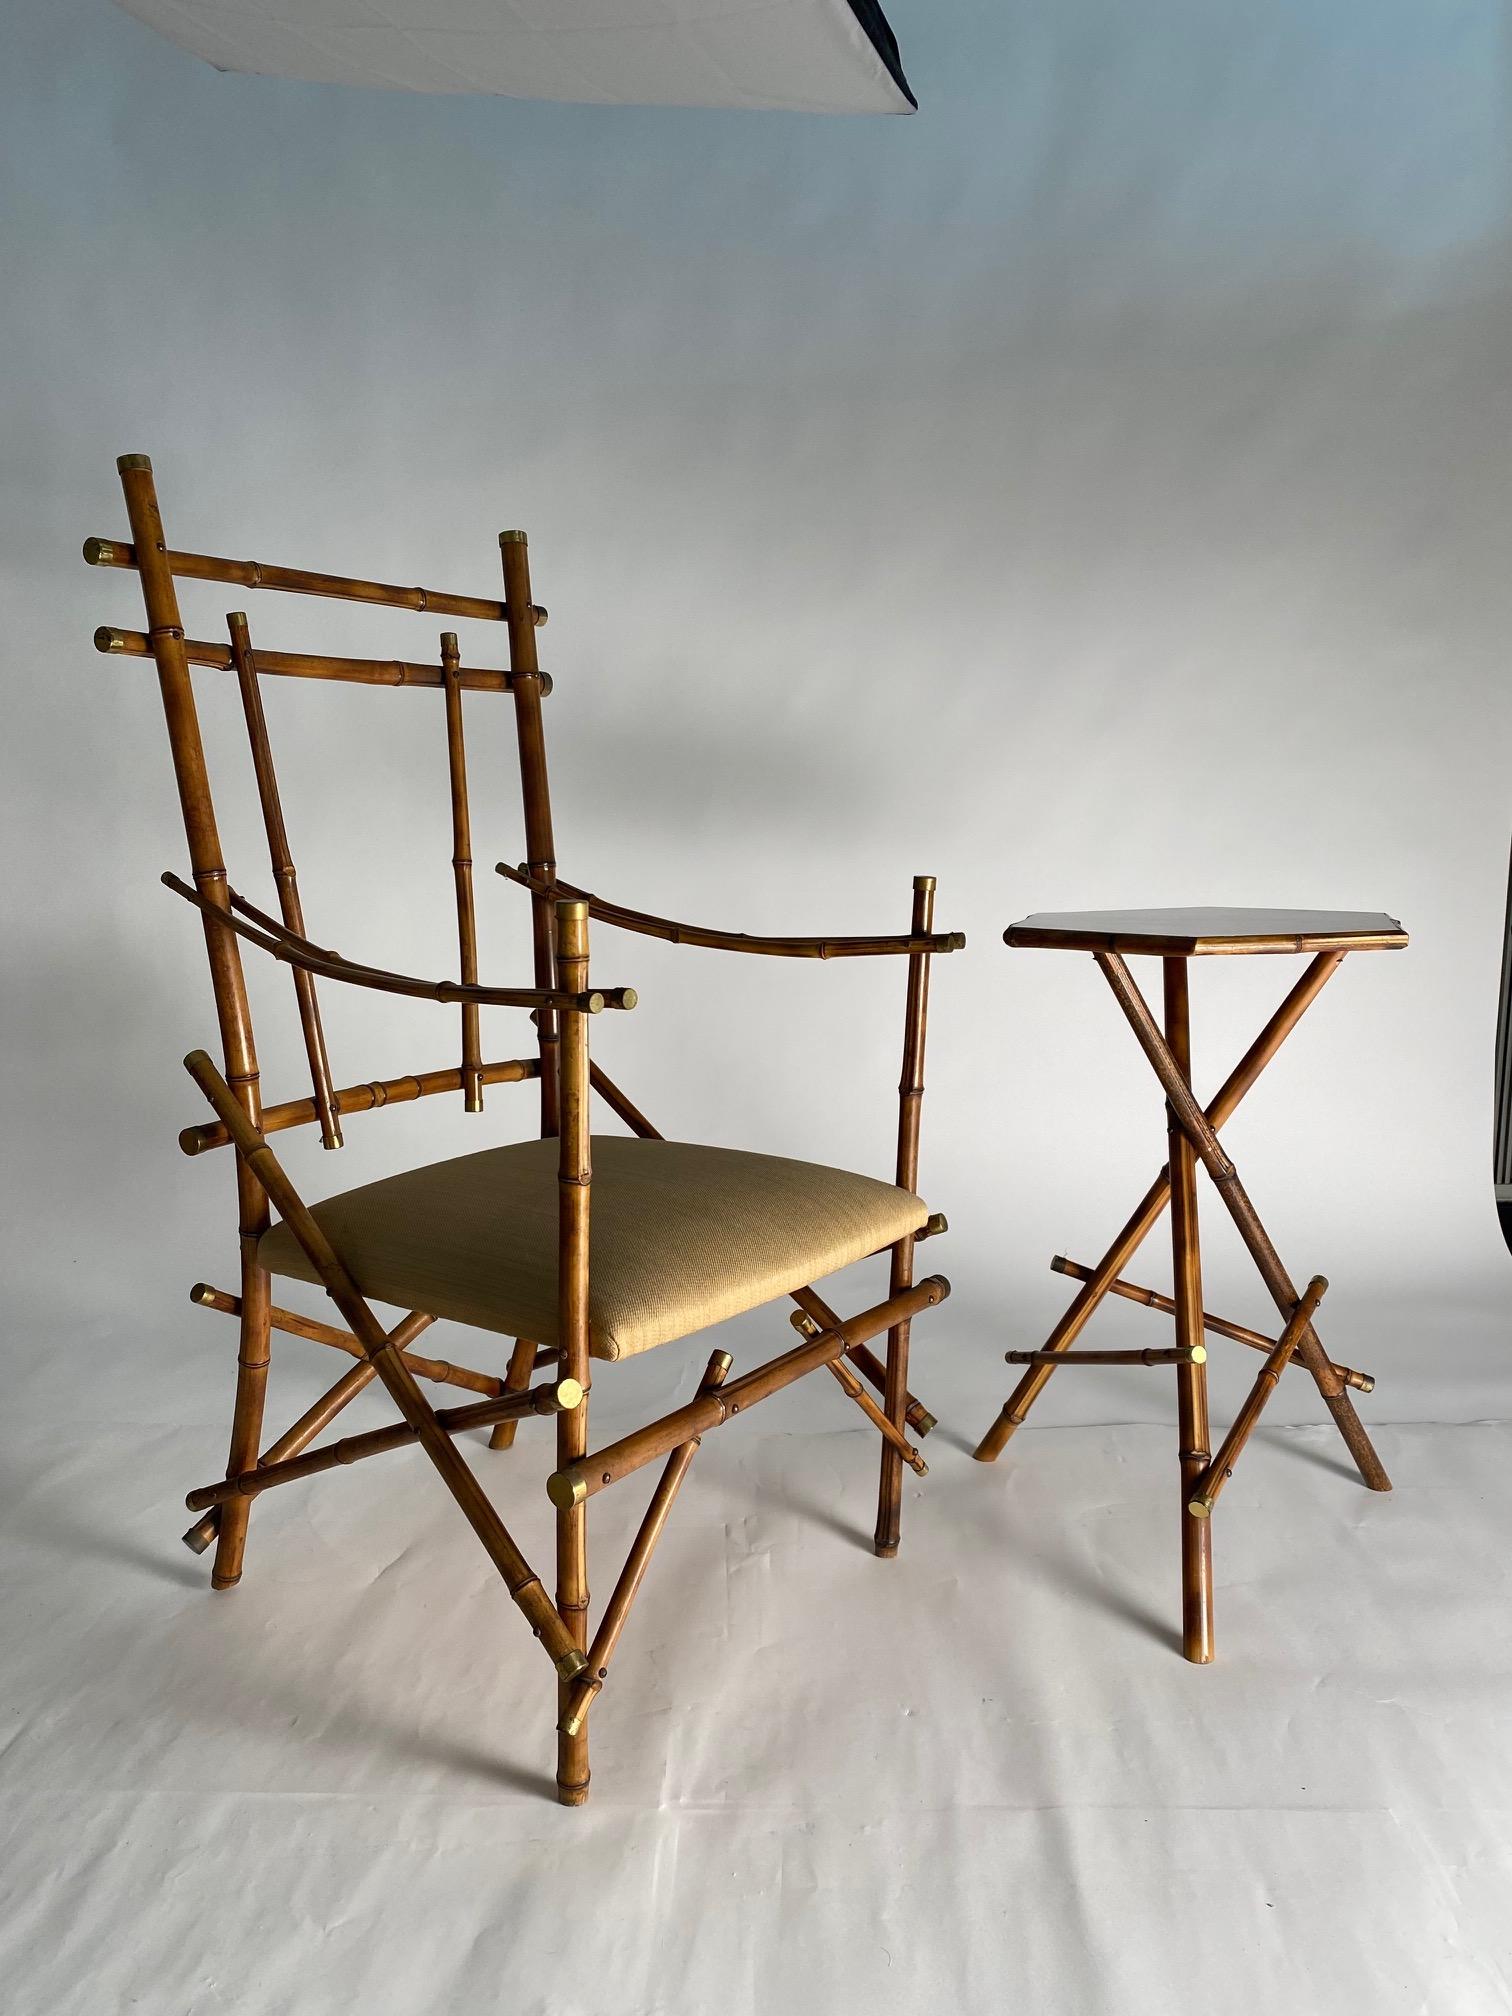 Rare and very refined pair of armchairs and coffee table made of bamboo and brass, Italy, 1970s.

Vivai Del sud production